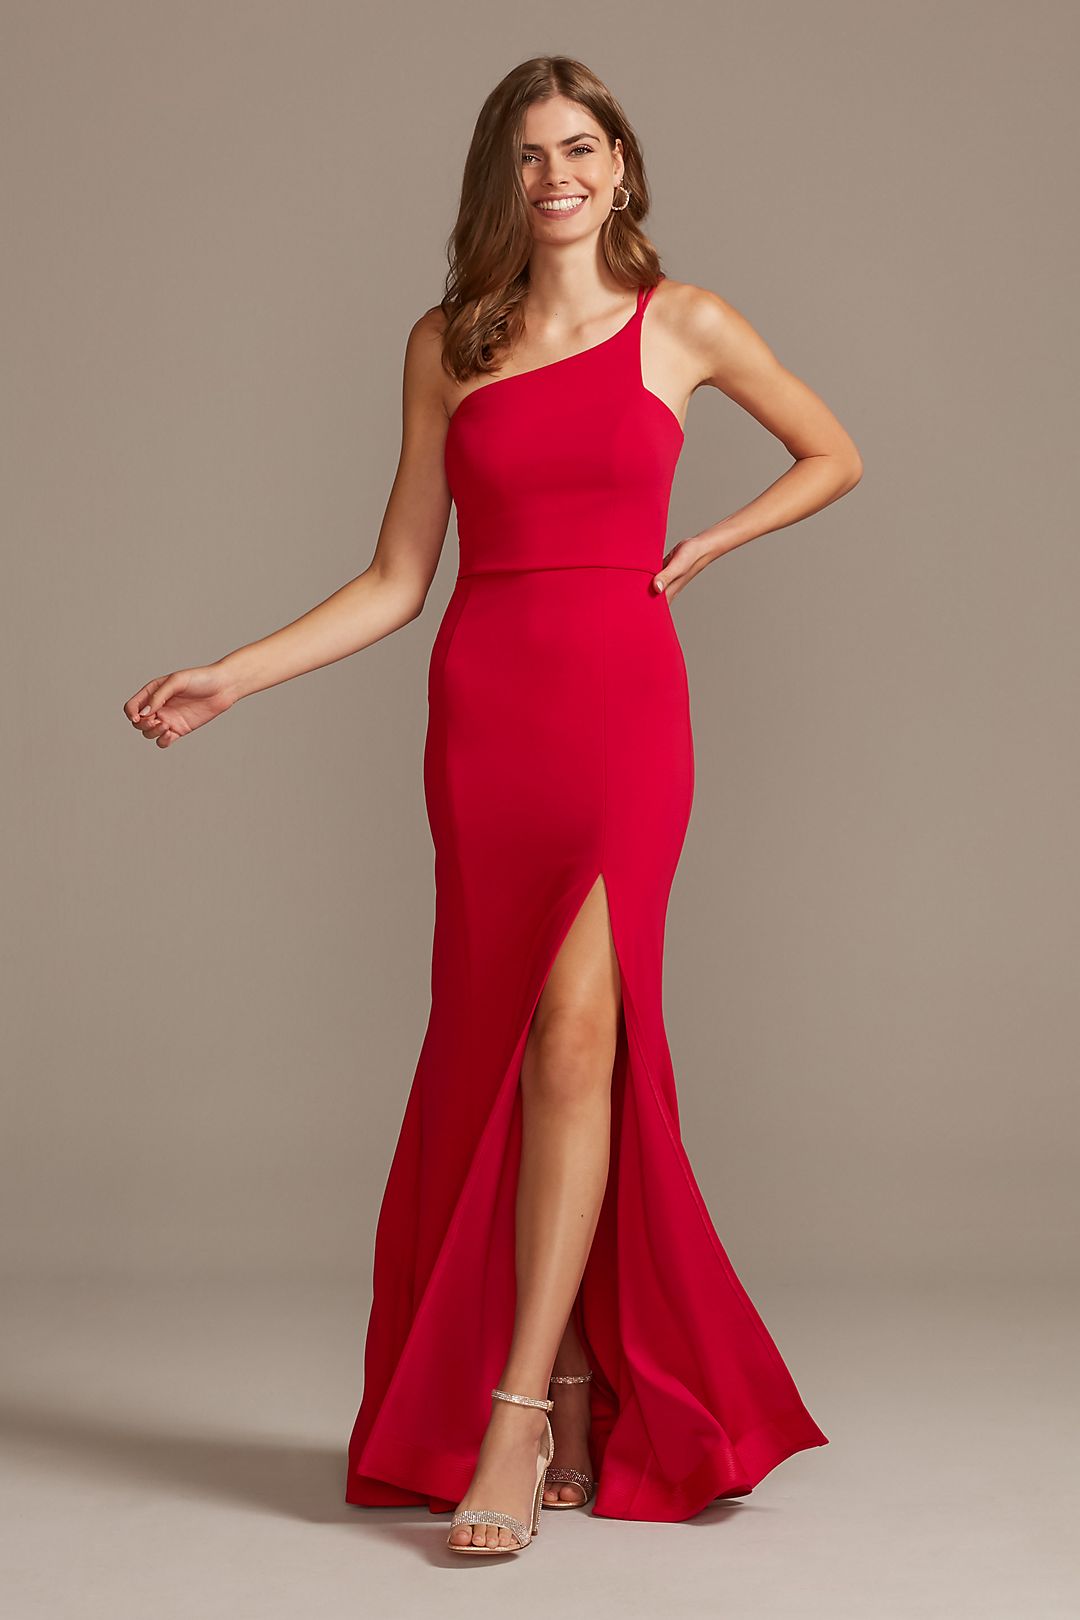 Asymmetric One-Shoulder Strappy Gown with Slit Image 1